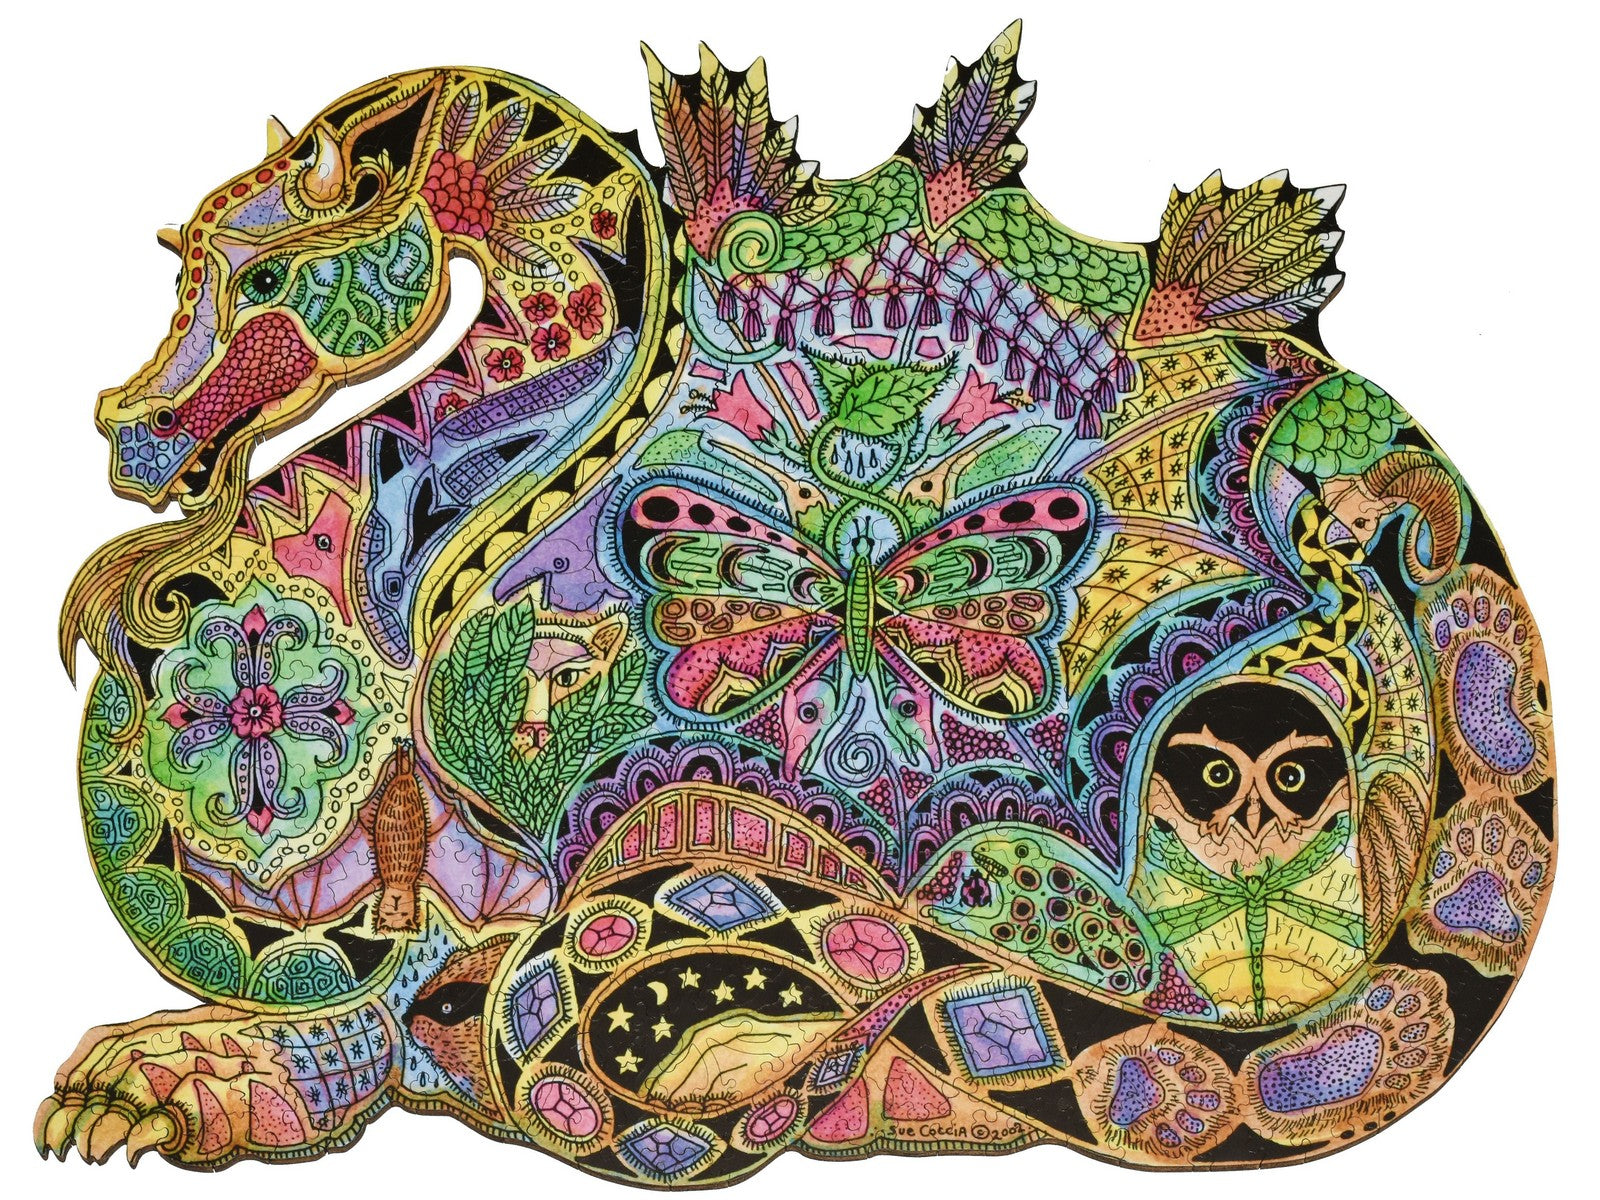 The front of the puzzle, Dragon, which shows various plants and animals in the shape of a dragon.